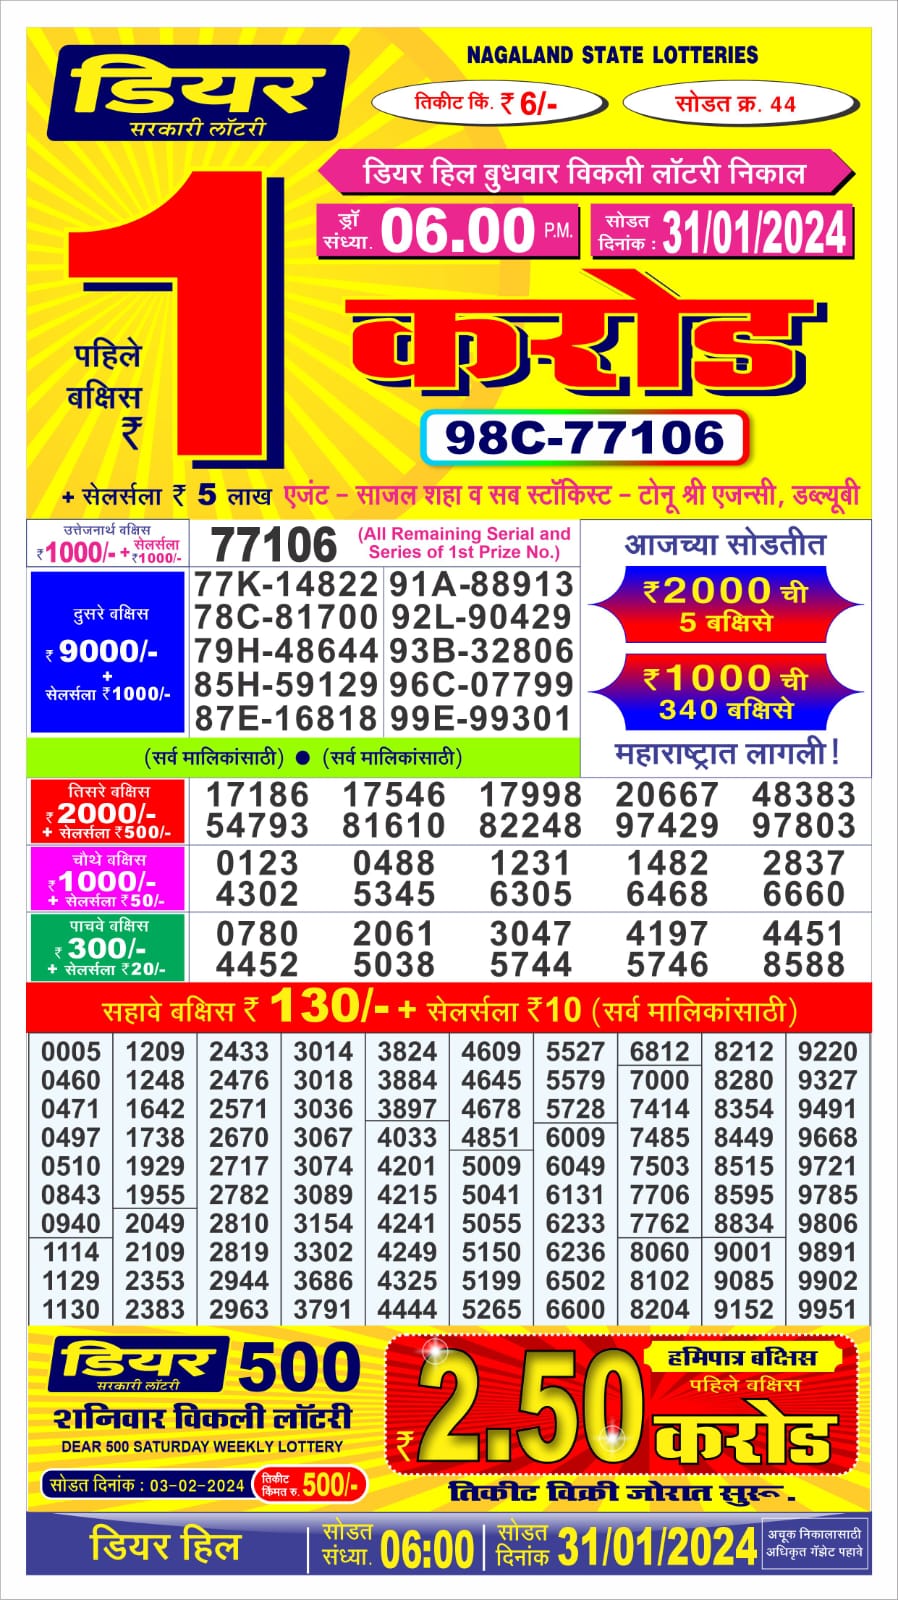 Dear Hill Wednesday Weekly Lottery Result,6 pm, 31.01.2024 All